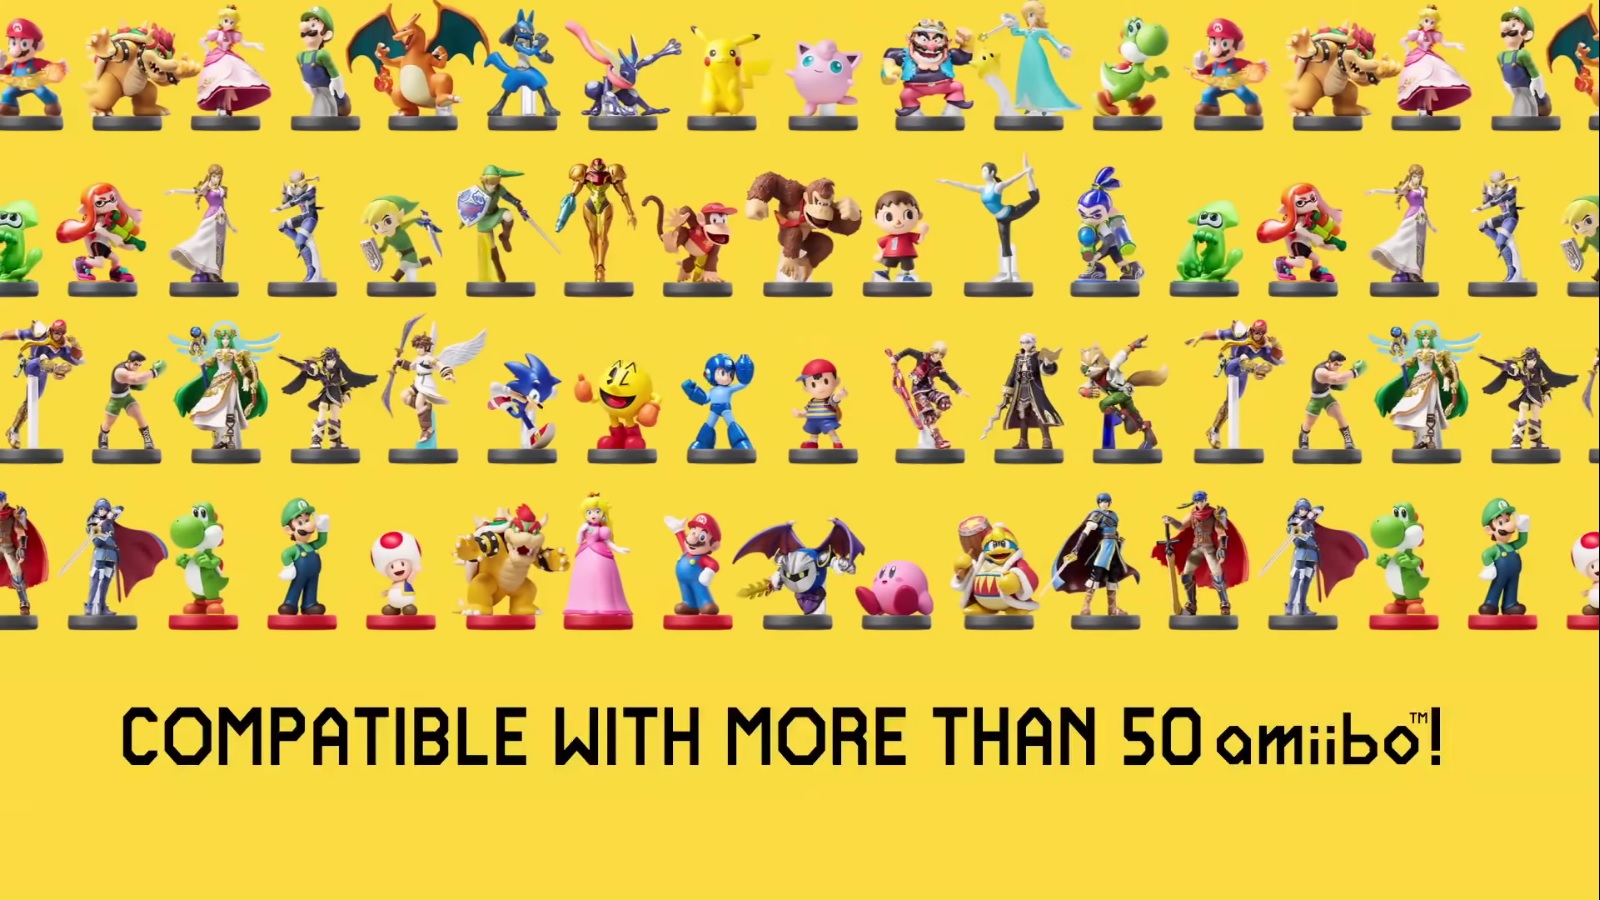 Super Mario Maker is compatible with over 50 amiibo